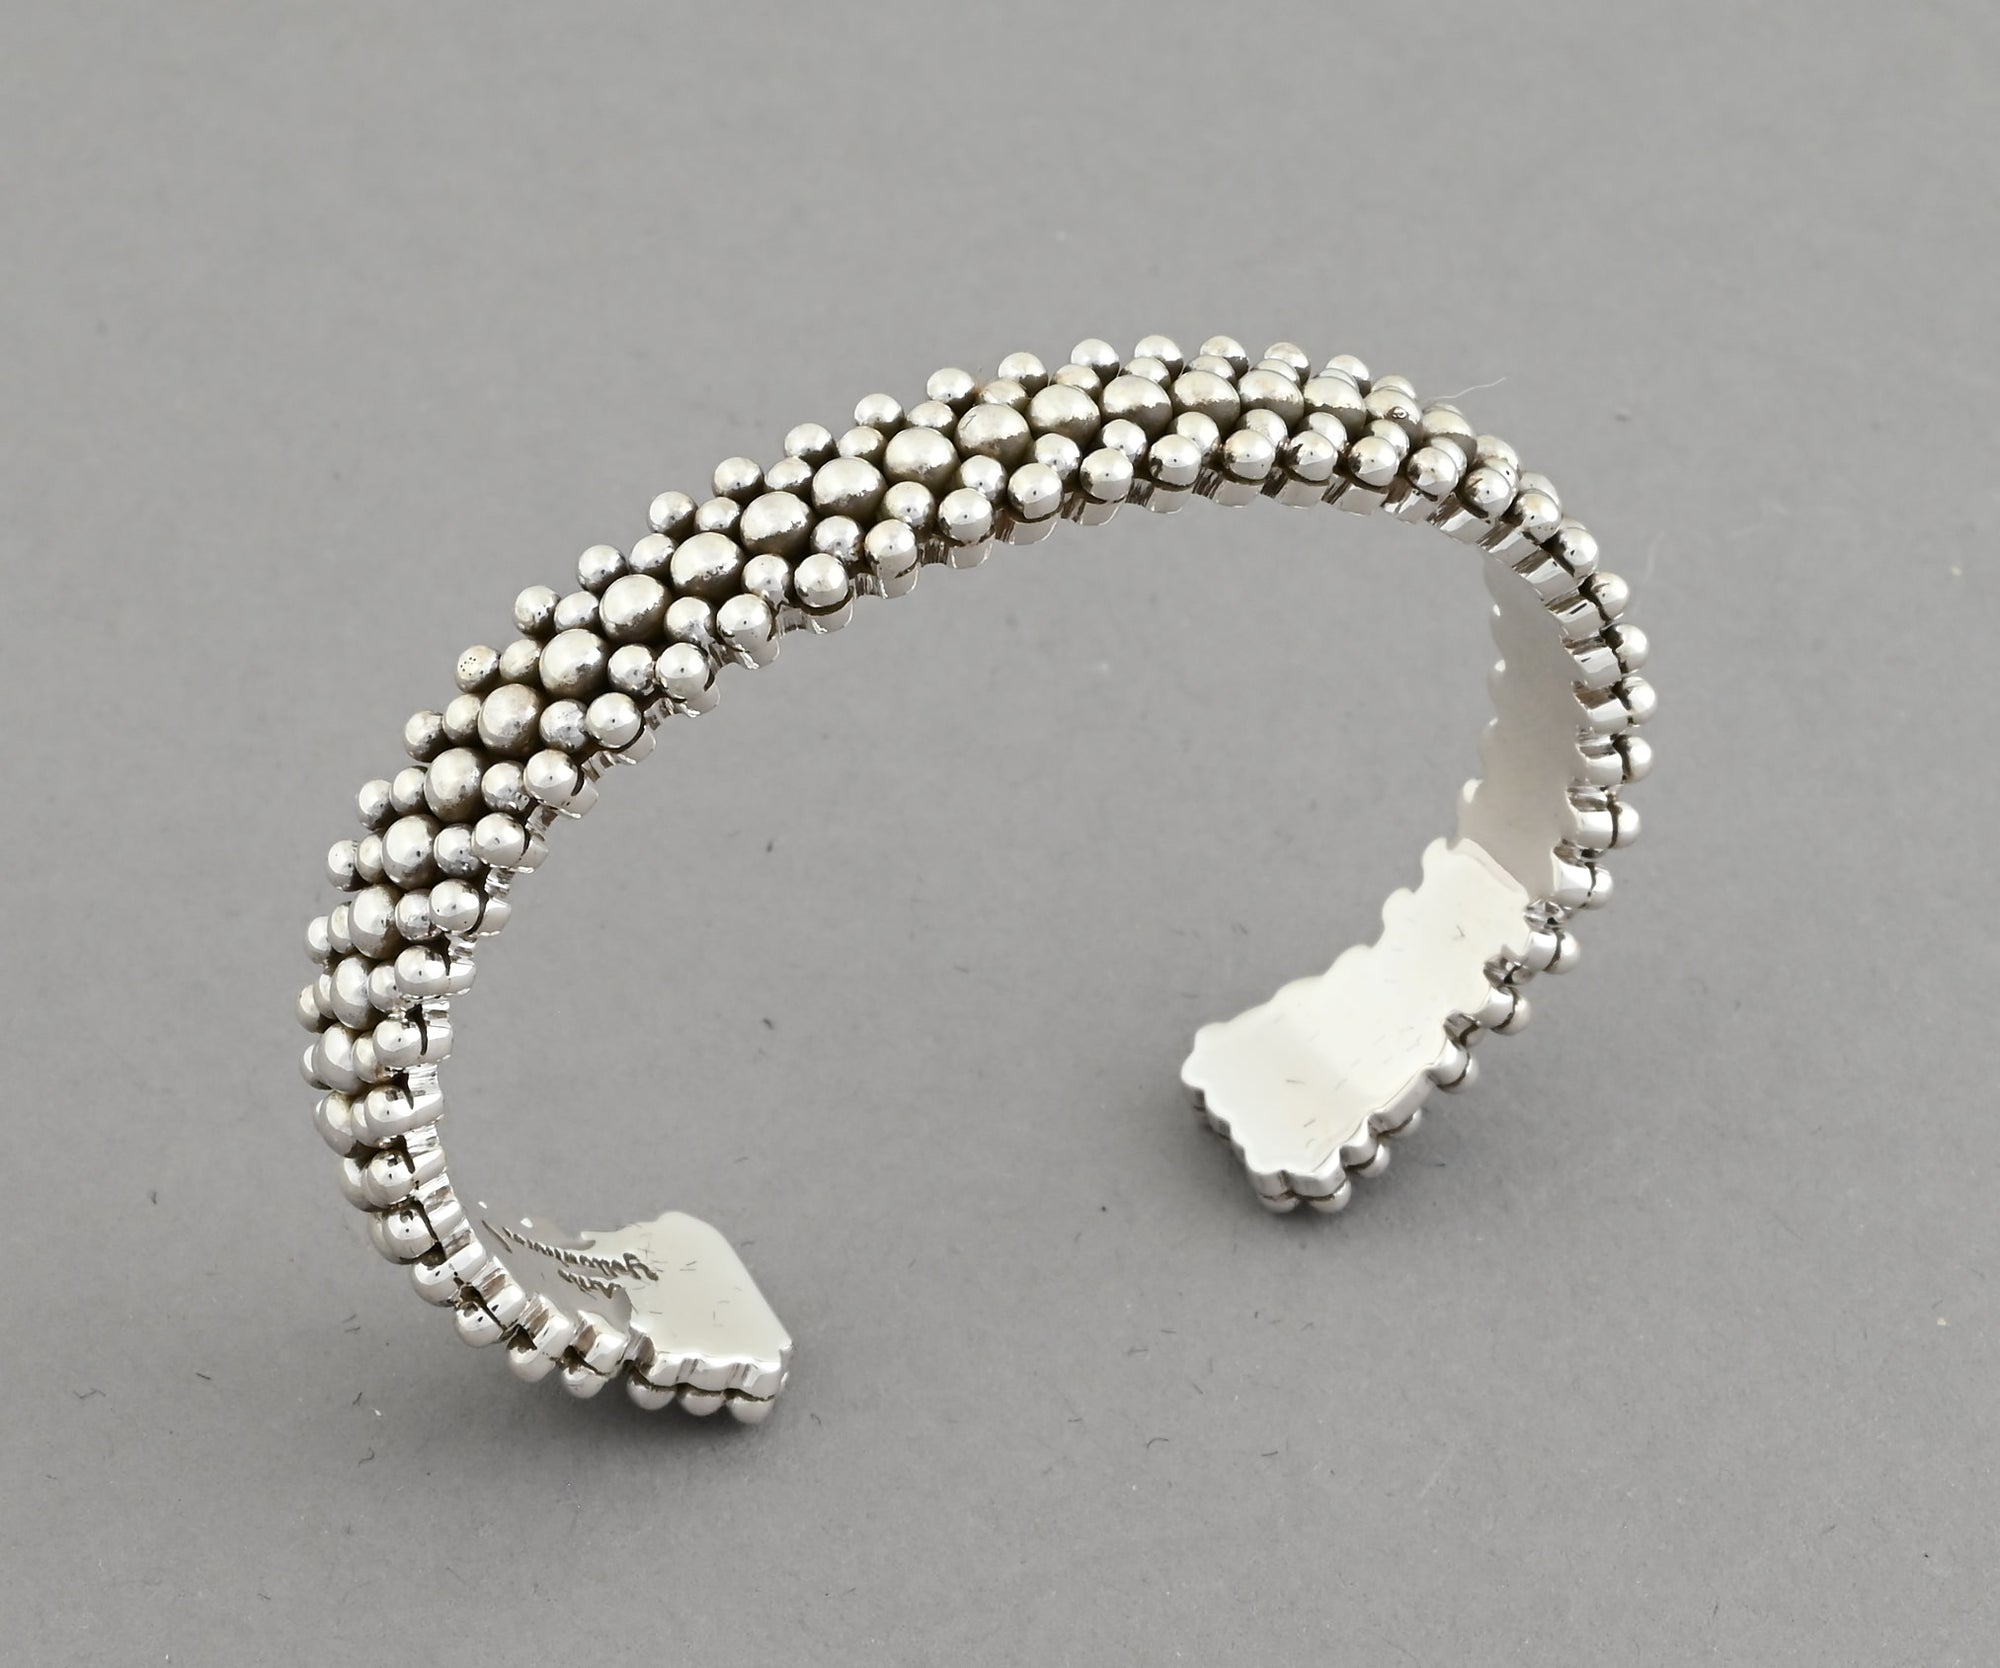 Cuff Bracelet with Five Dot Rows by Artie Yellowhorse